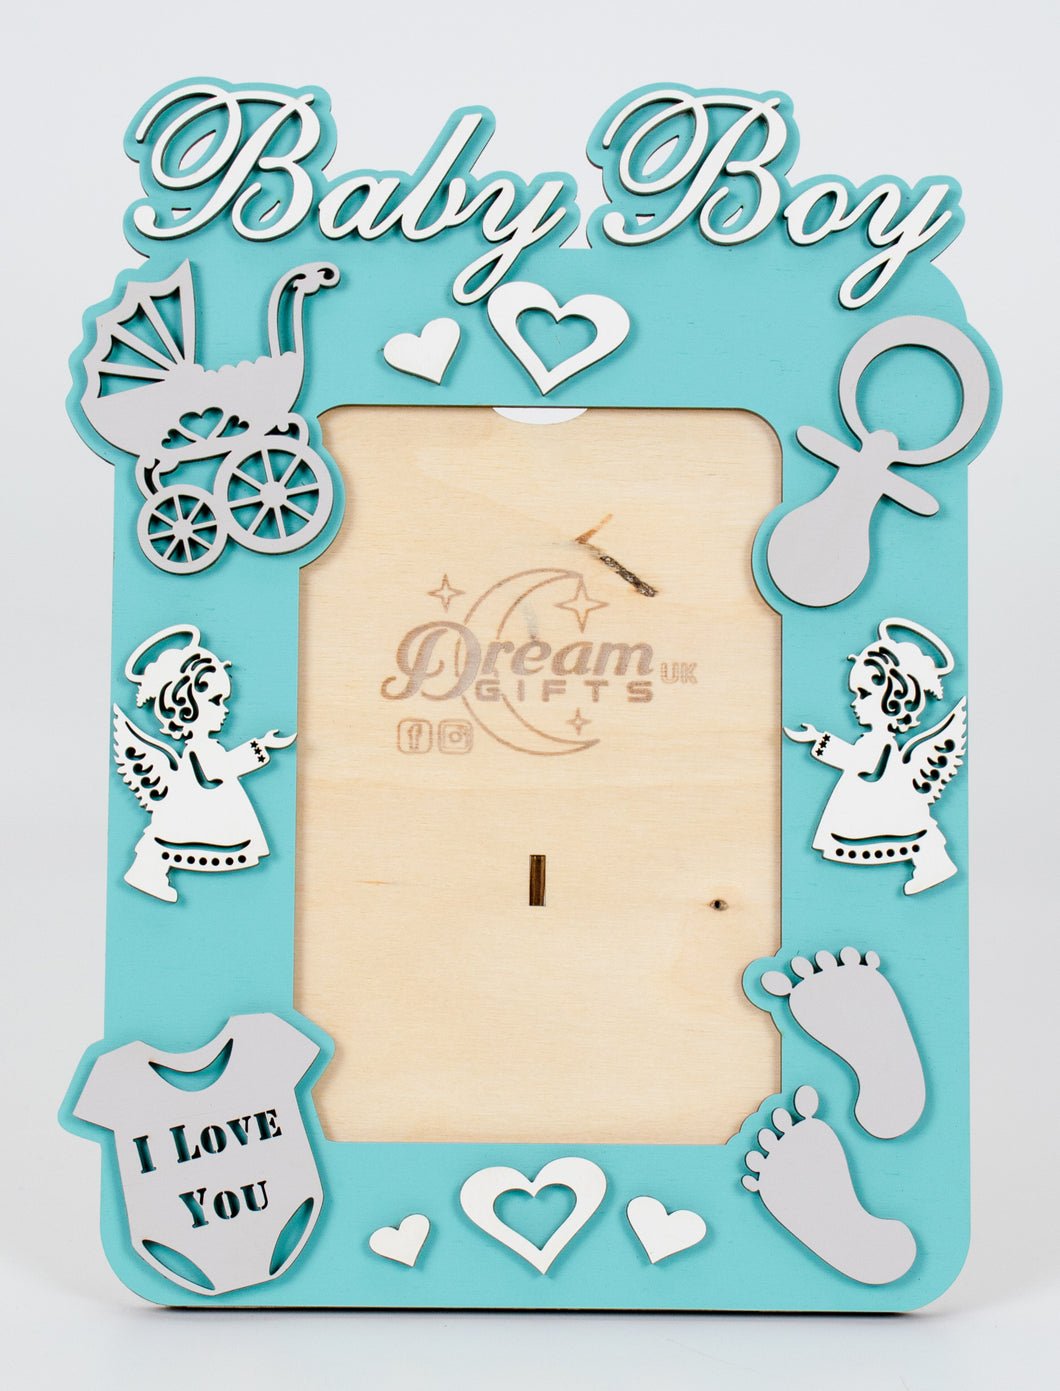 Baby Boy, DreamGifts Baby Wooden Photo Frame Custom Hand Made for Tabletop or Wall, Decorative Style, Gift idea